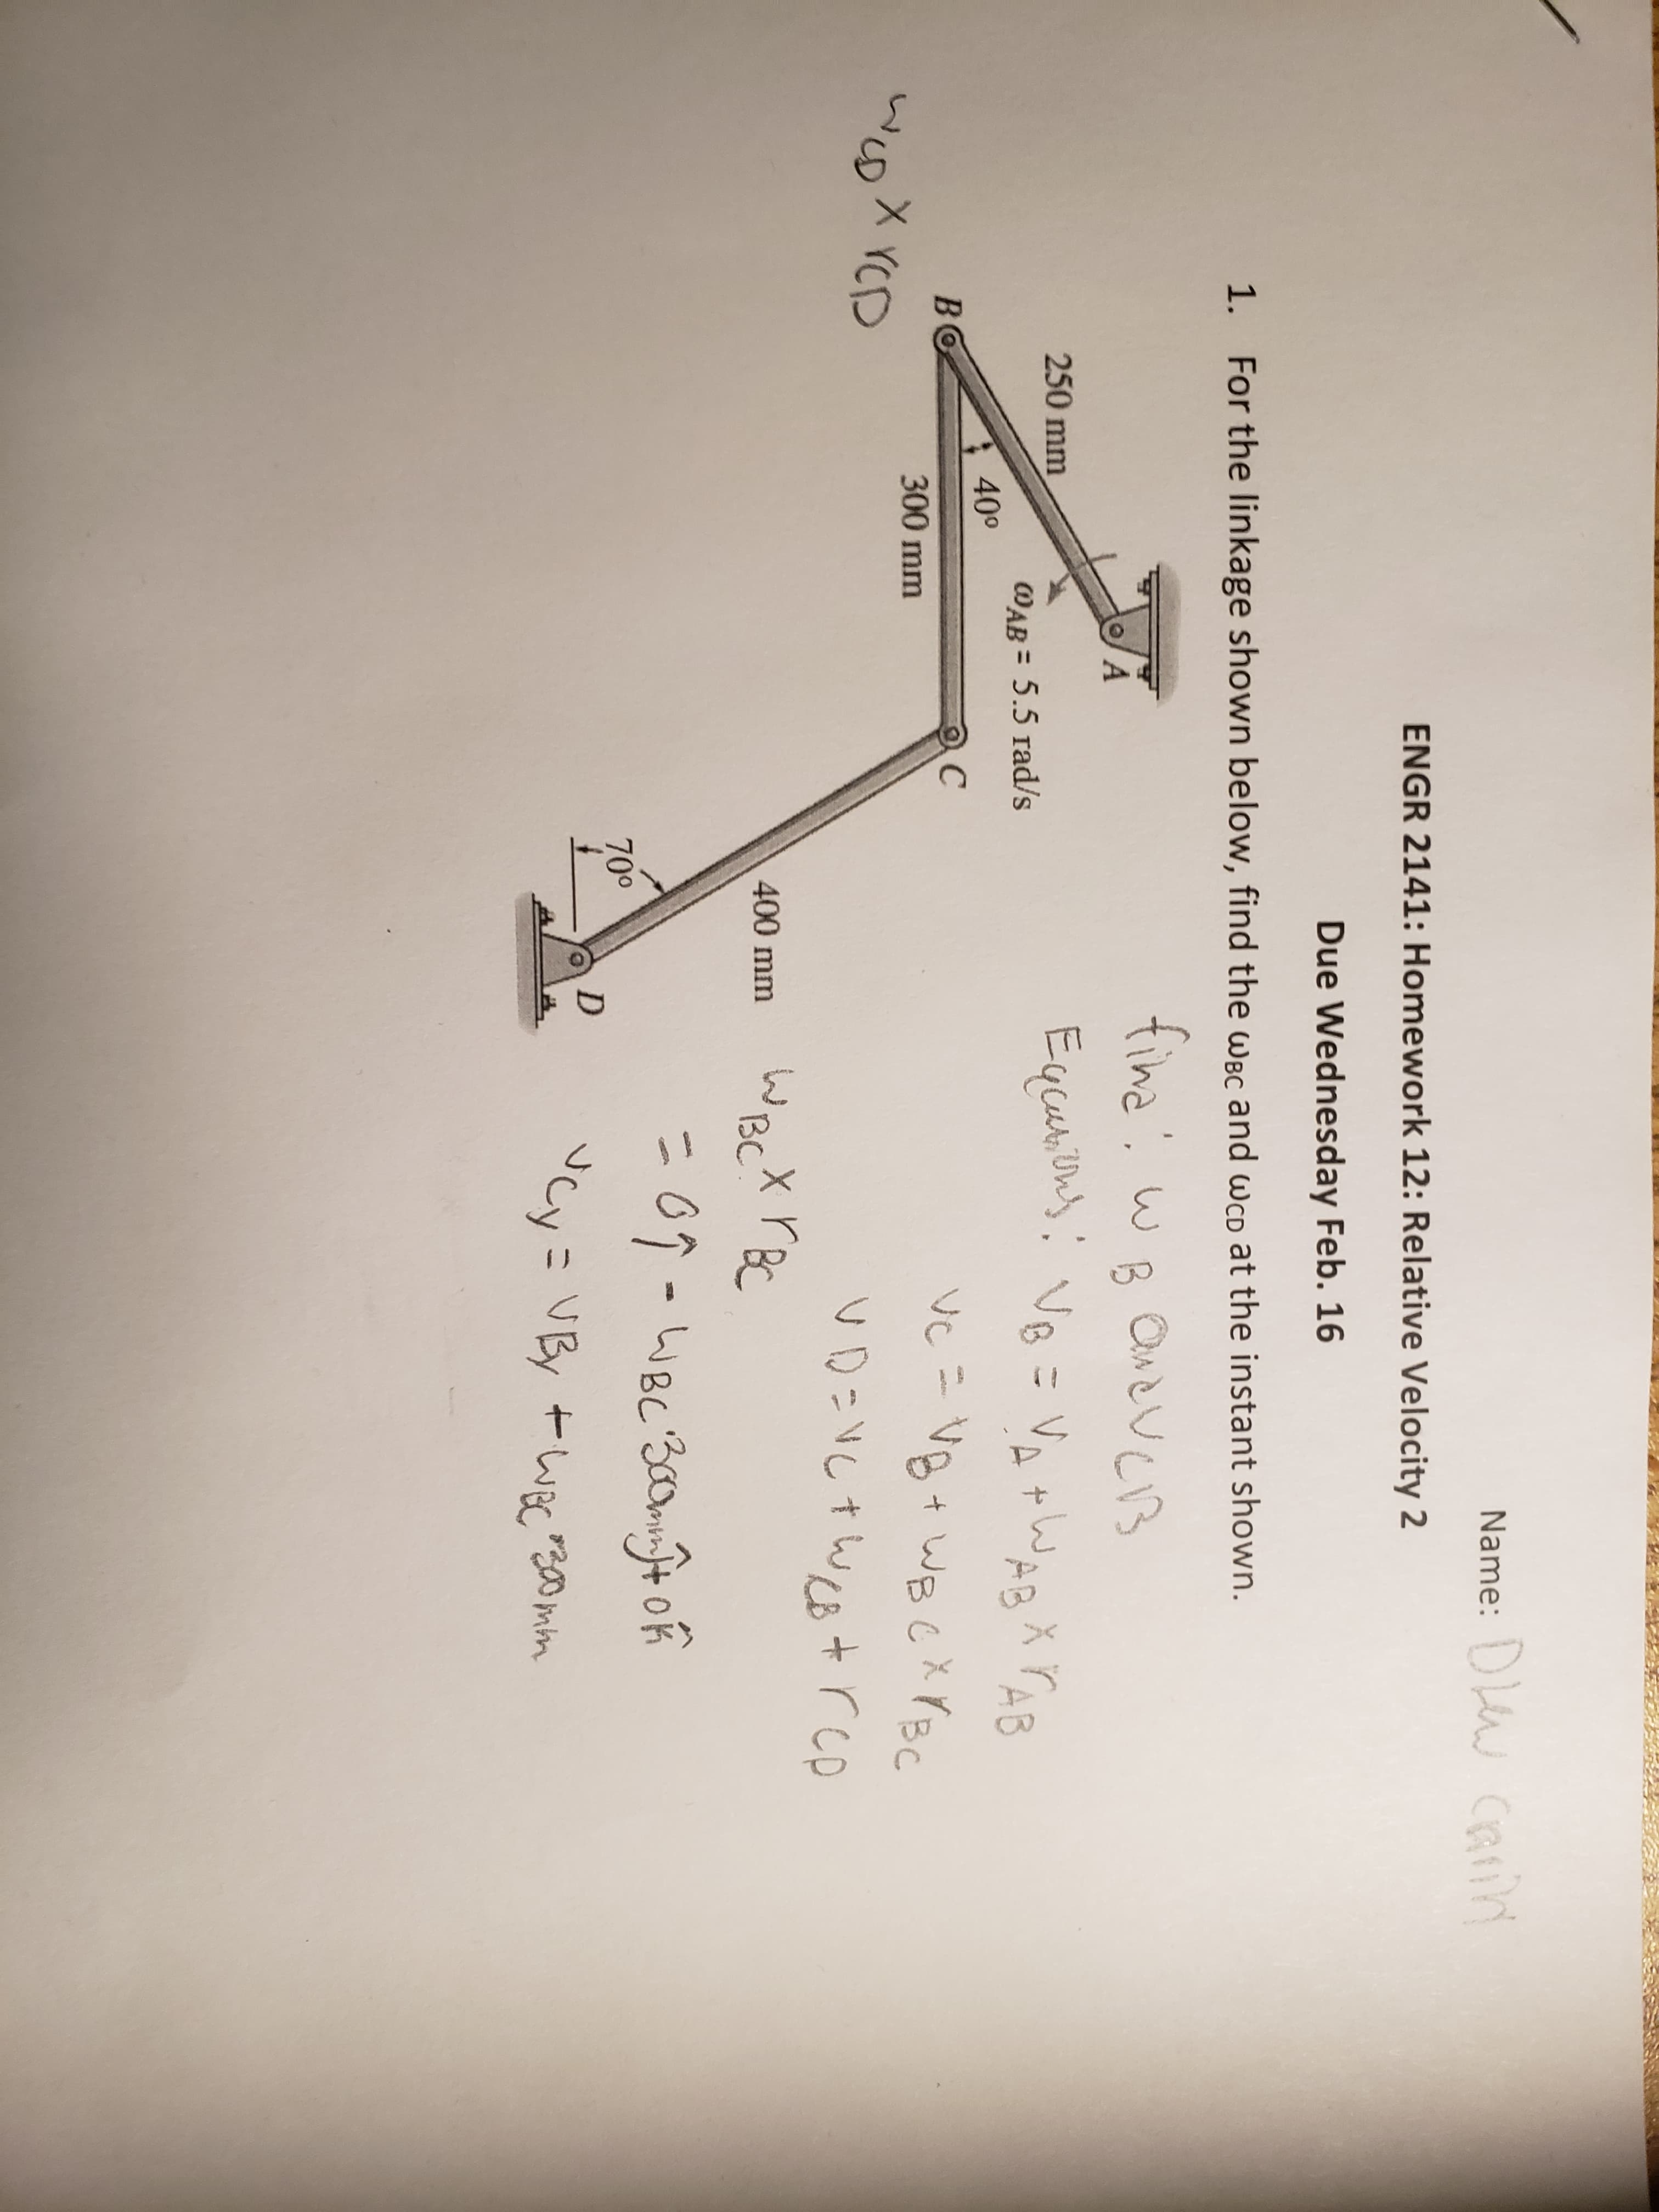 Name: DW CRin
ENGR 2141: Homework 12: Relative Velocity 2
Due Wednesday Feb. 16
1. For the linkage shown below, find the wBc and wcp at the instant shown.
fina, wB OneveB
A
250 mm
YAB
WAB = 5.5 rad/s
40°
BO
C
VC = Vg + WBCX YBC
300 mm
X YCD
UD:VしナWる+ rcp
WBCX rBC
こo9-wBc'3c0mo
400 mm
70°
VBy +wec00mim
%3D
